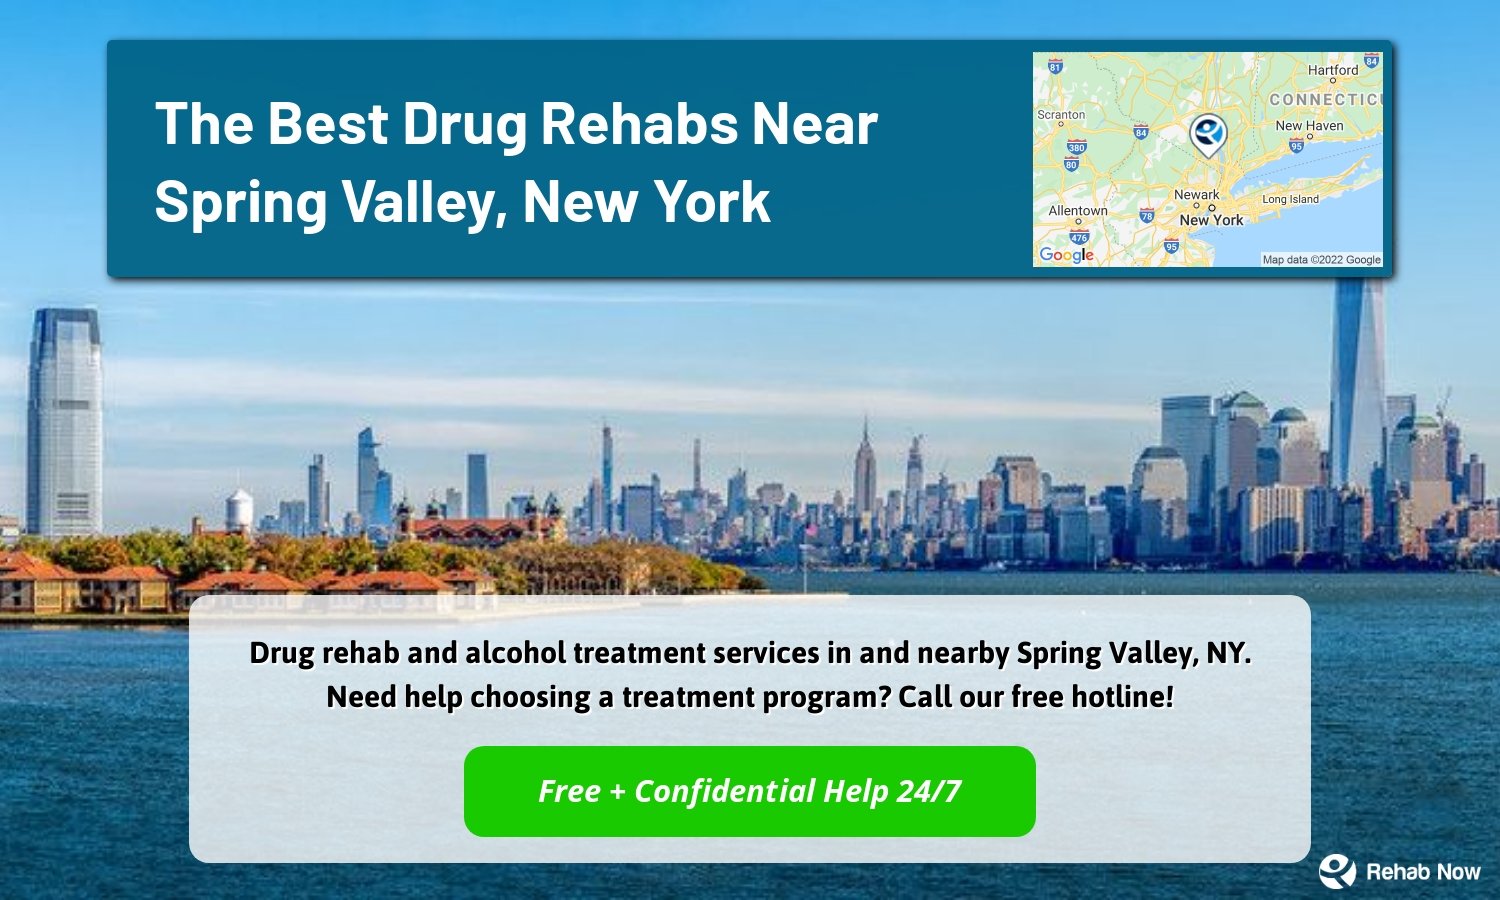 Drug rehab and alcohol treatment services in and nearby Spring Valley, NY. Need help choosing a treatment program? Call our free hotline!